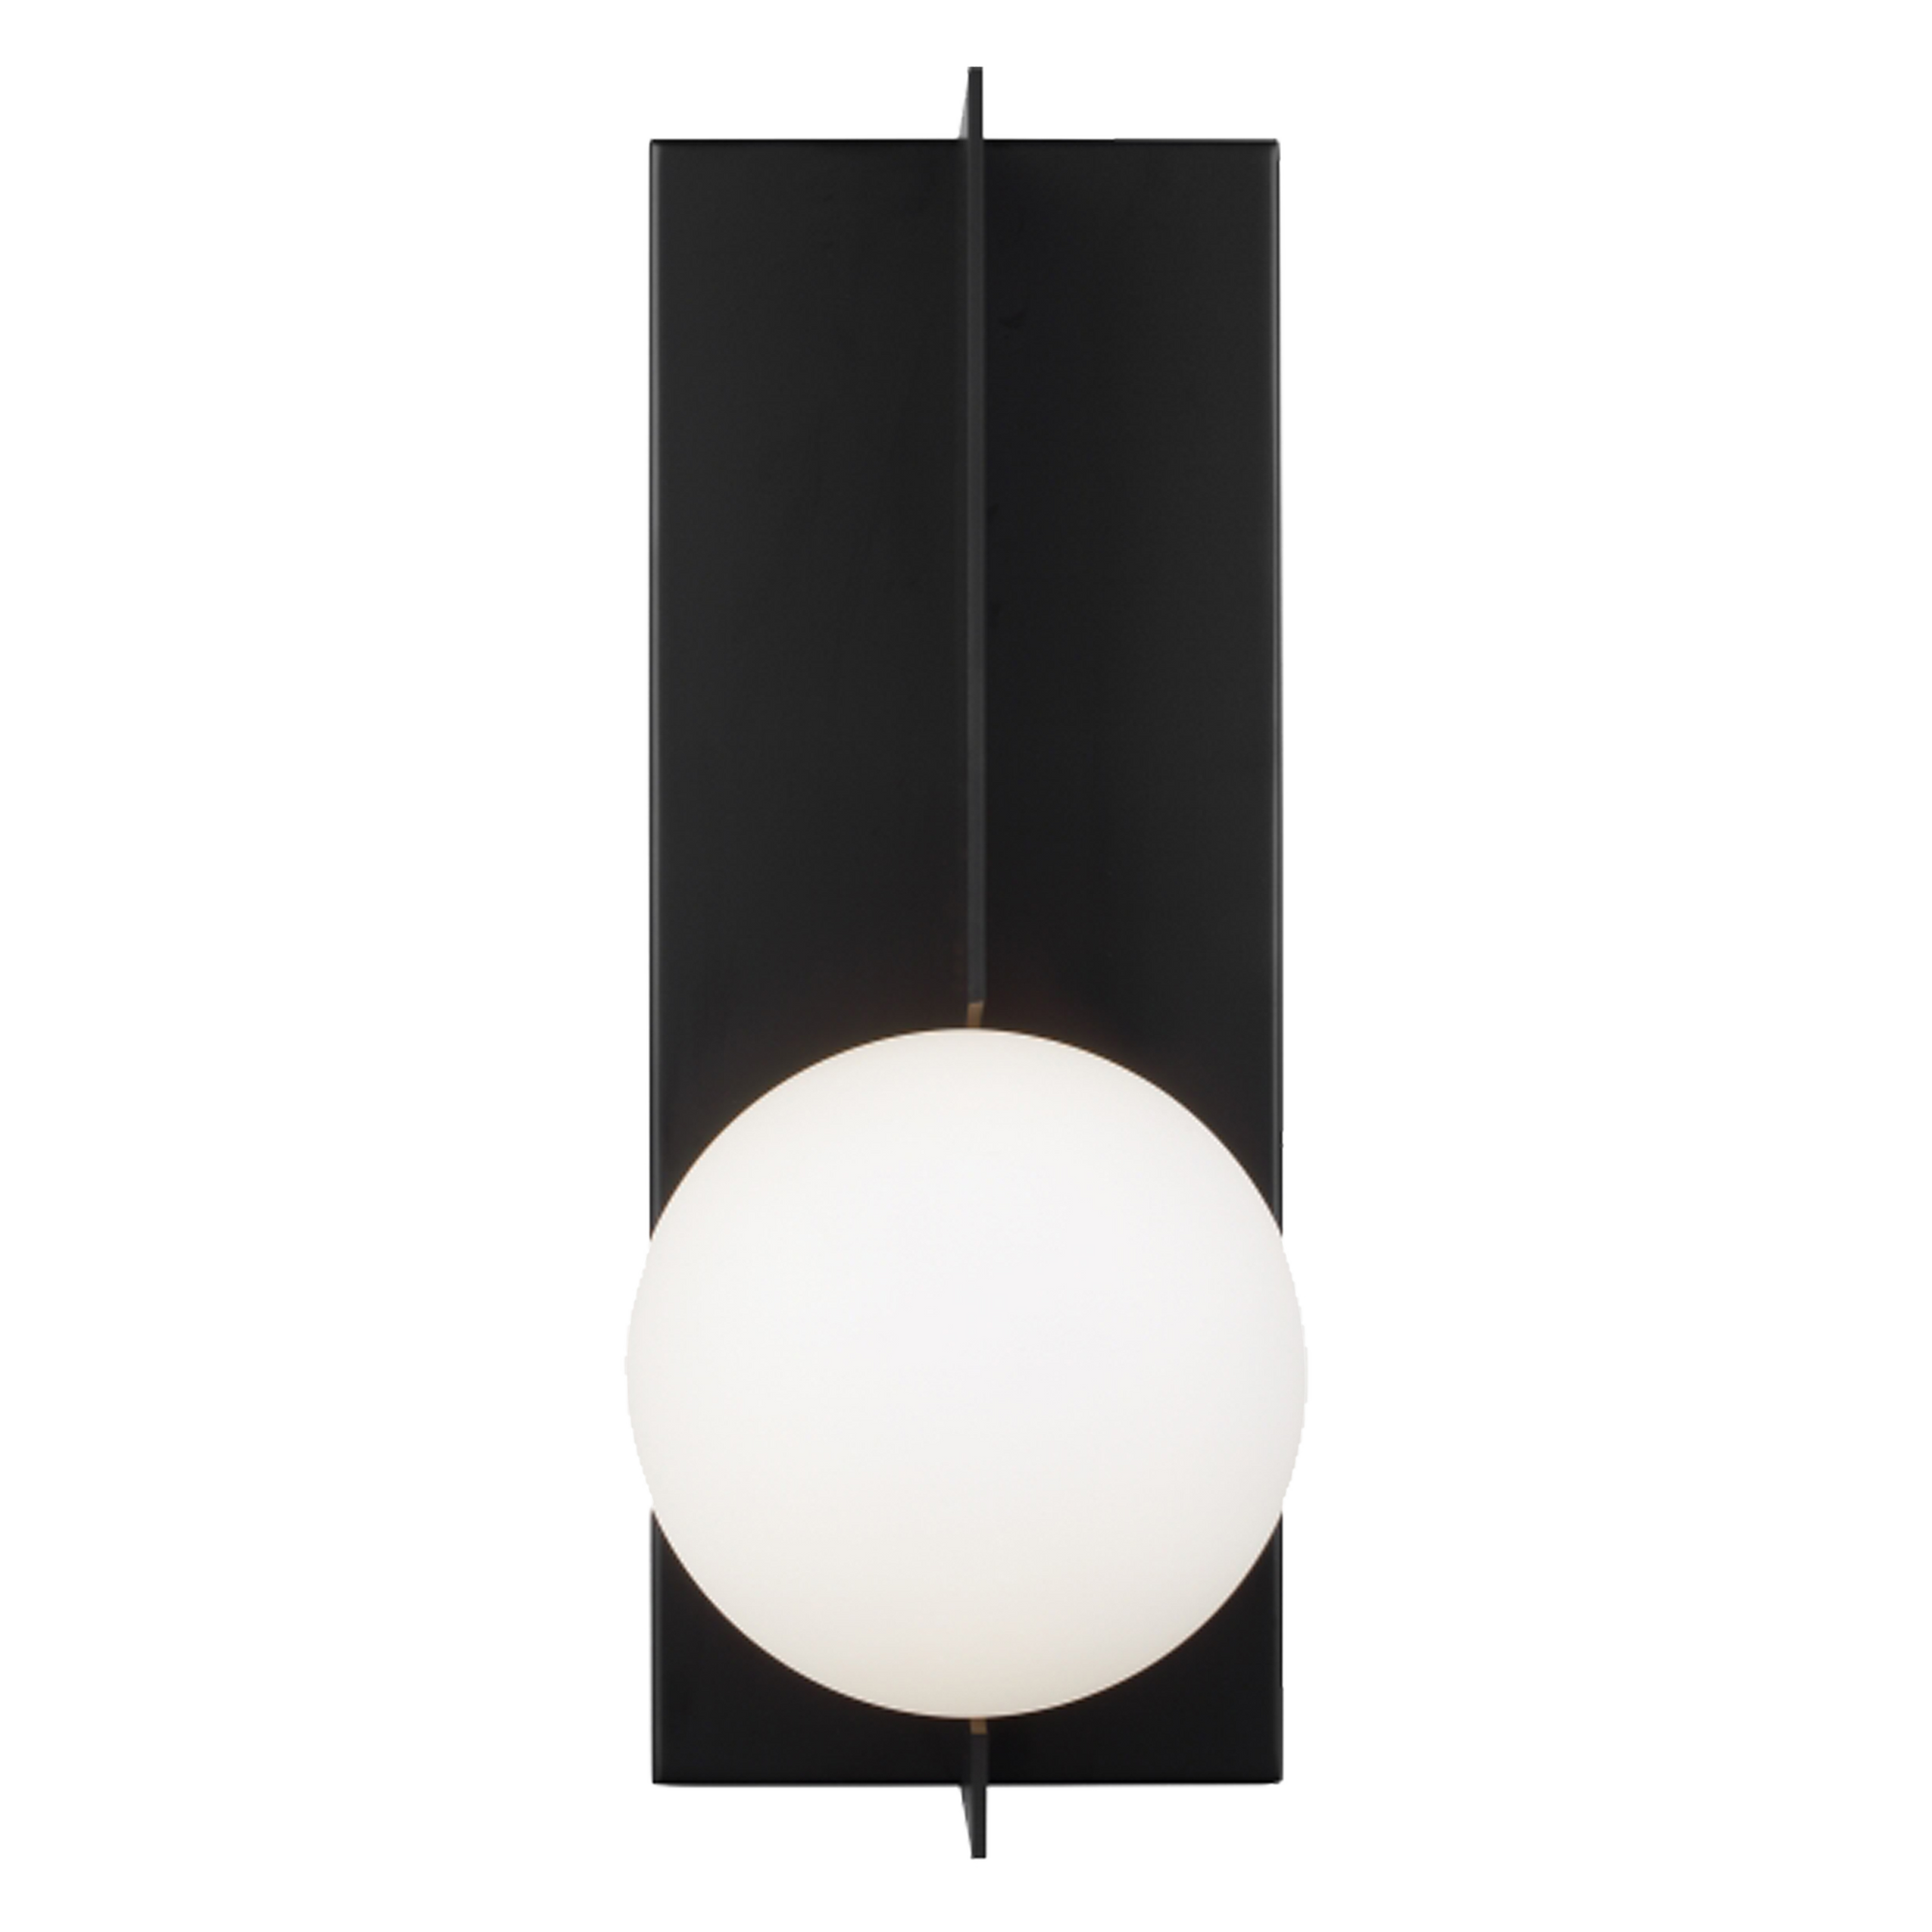 The Declan Wall Light was inspired by Mid-Century modern art with contrasting geometric shapes.